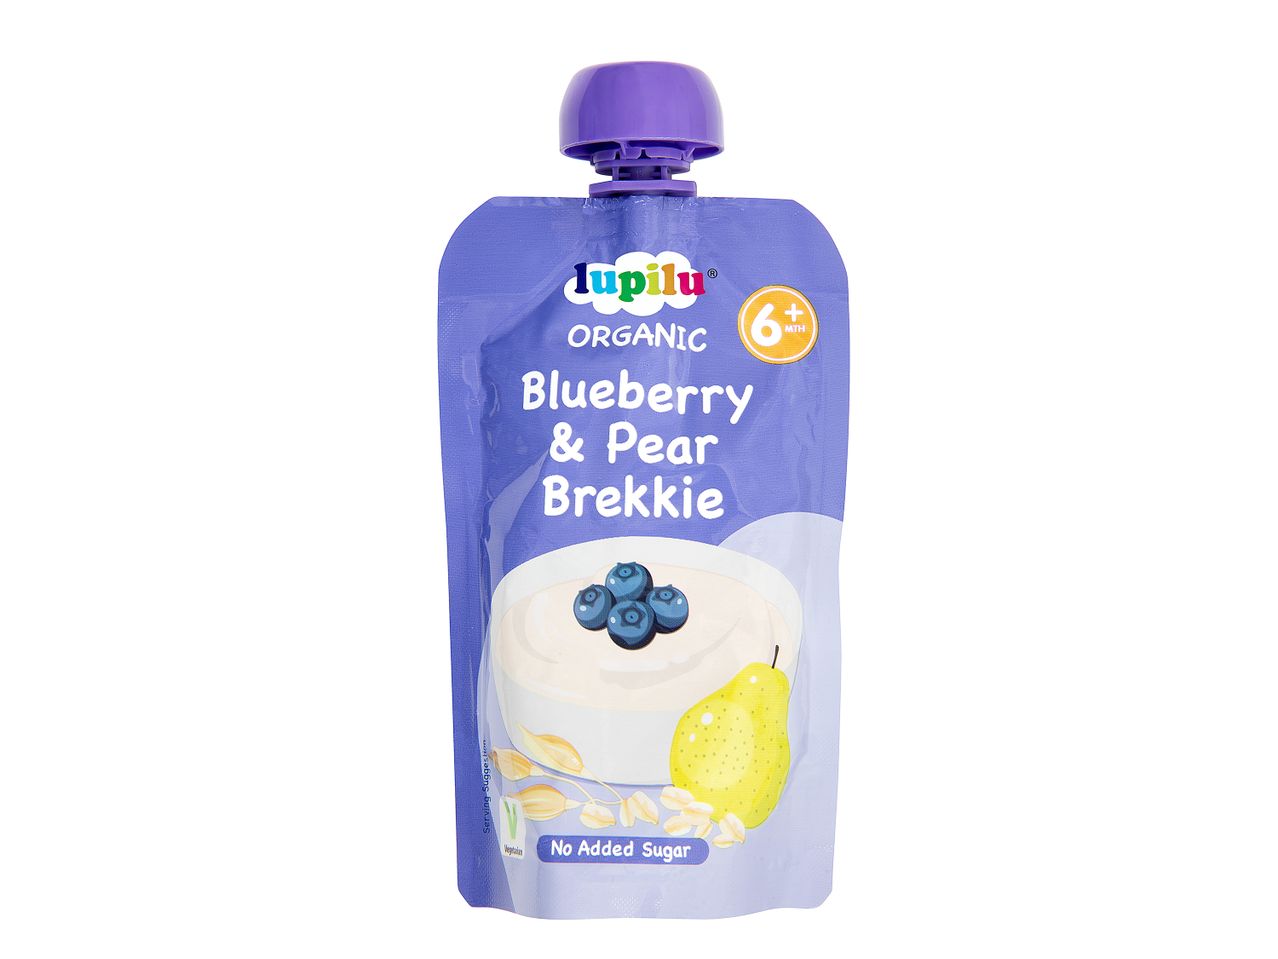 Go to full screen view: Lupilu Organic Blueberry & Pear Breakfast Pouches - Image 1